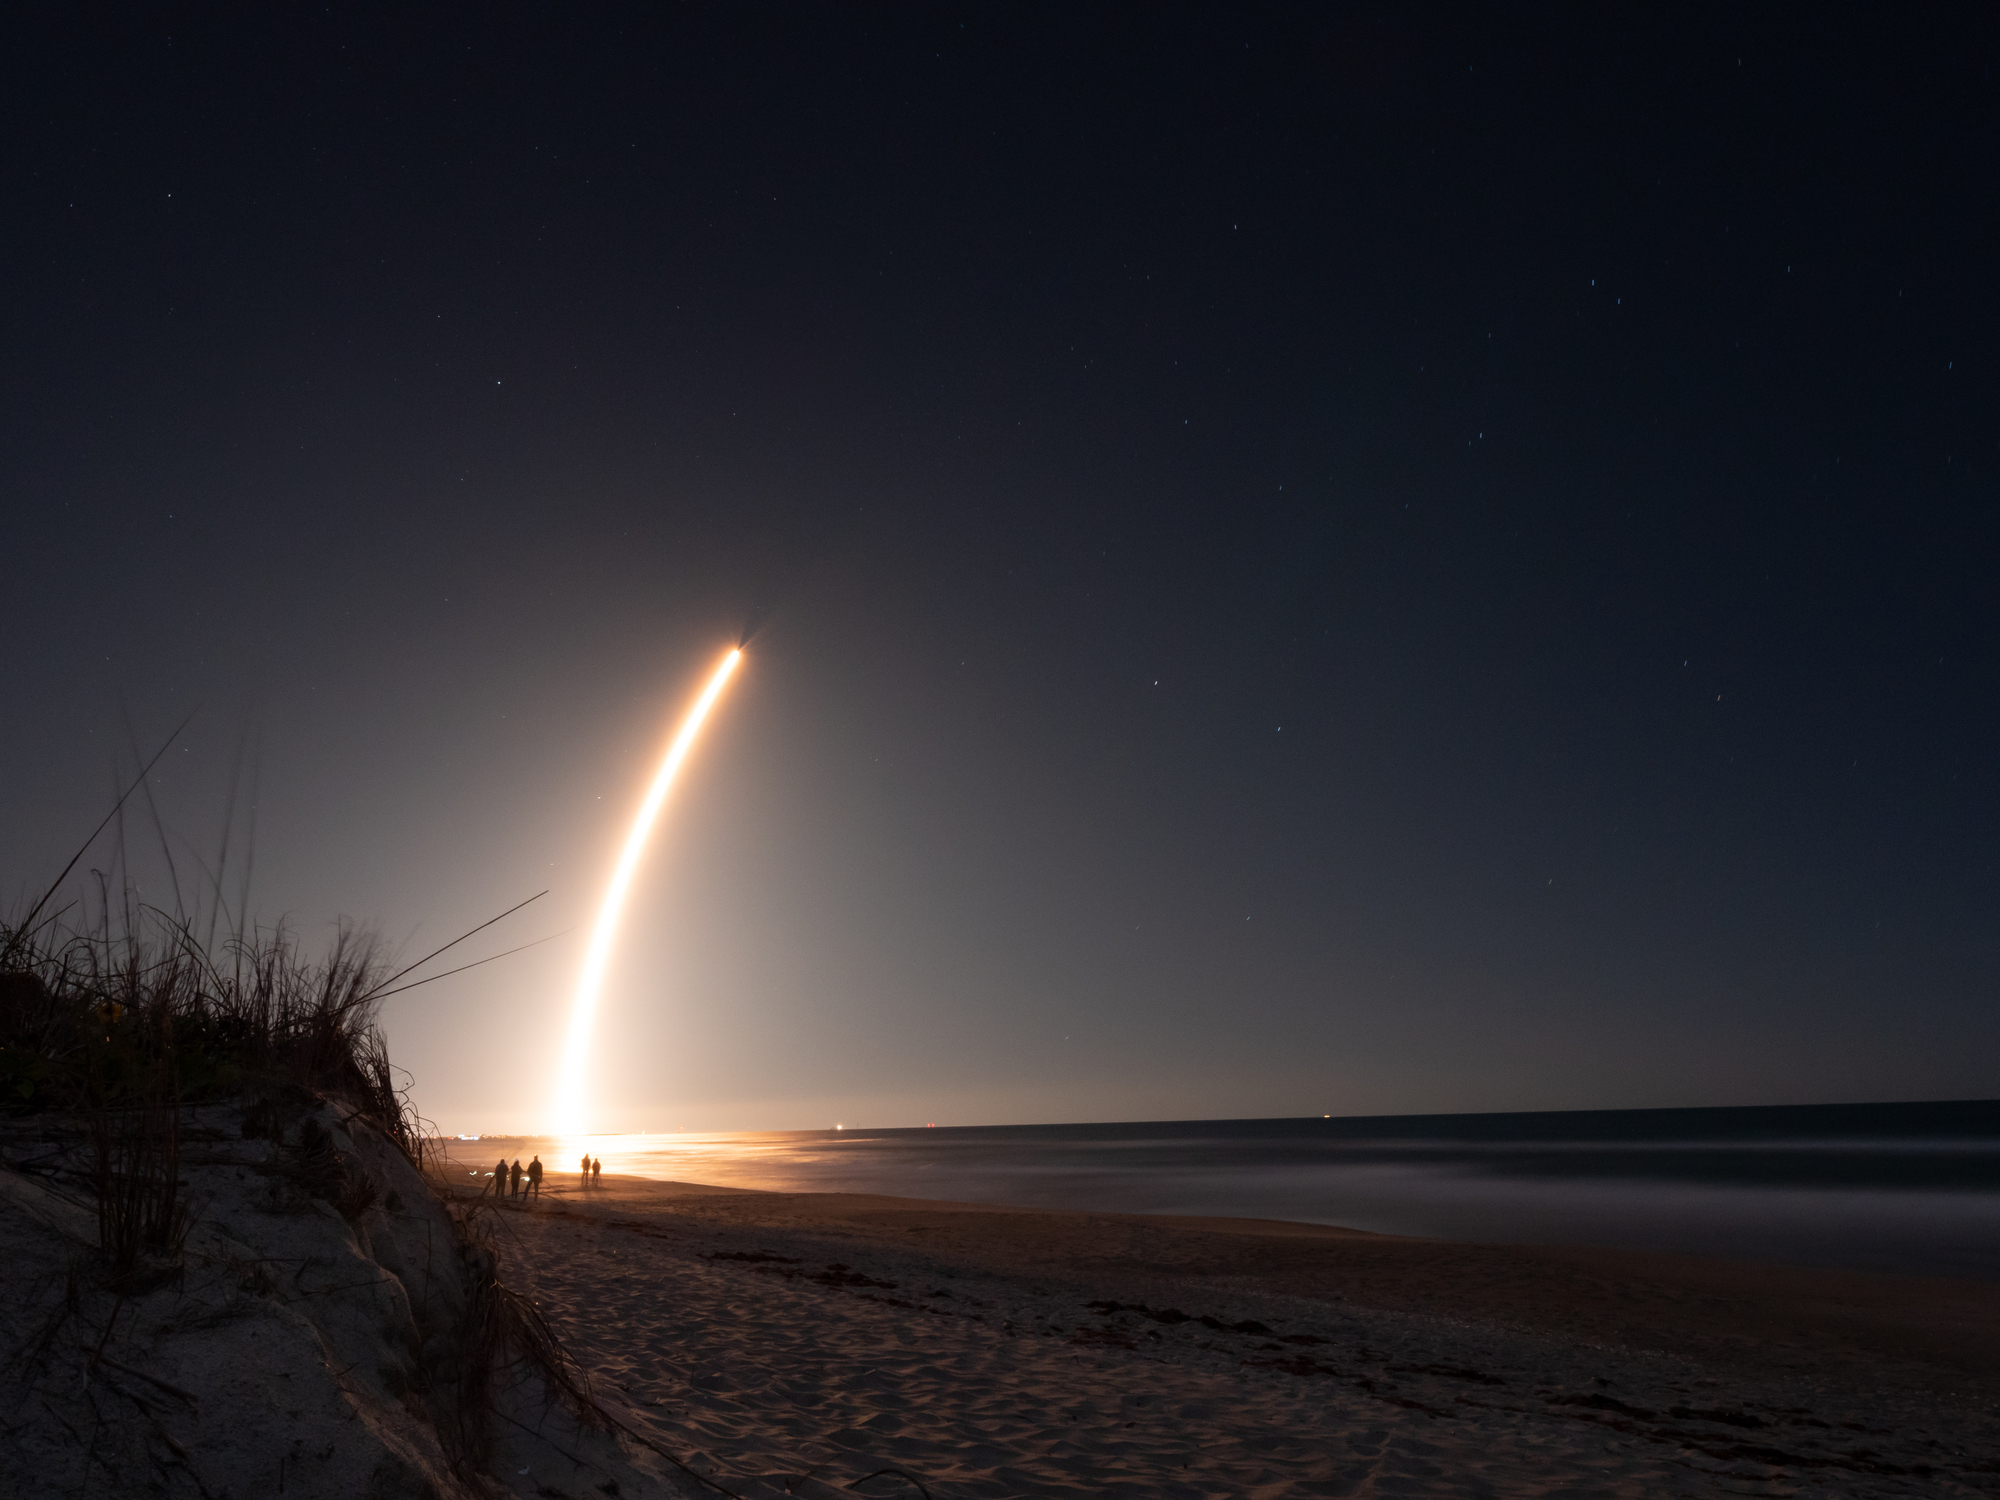 SpaceX will break a major rocket-launch record this week